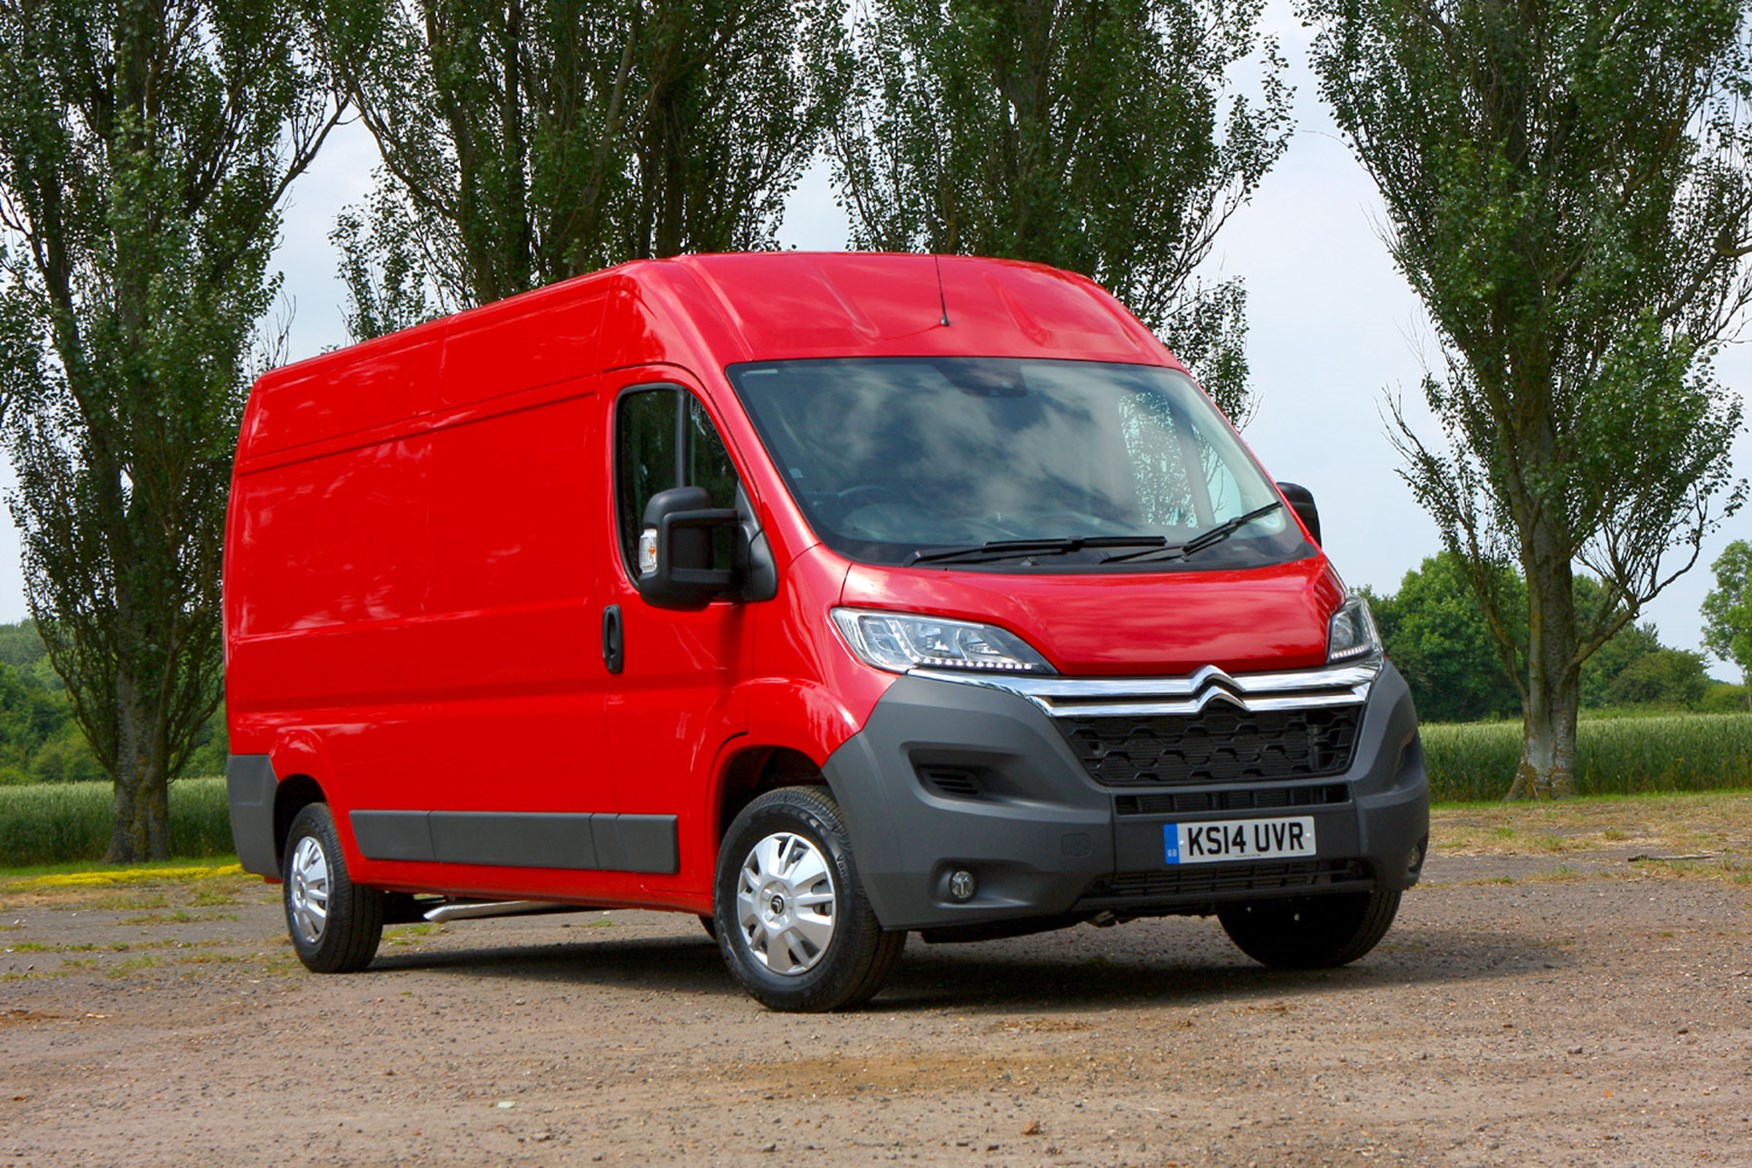 Citroen Relay 2.2 HDi 130 review - front view, red